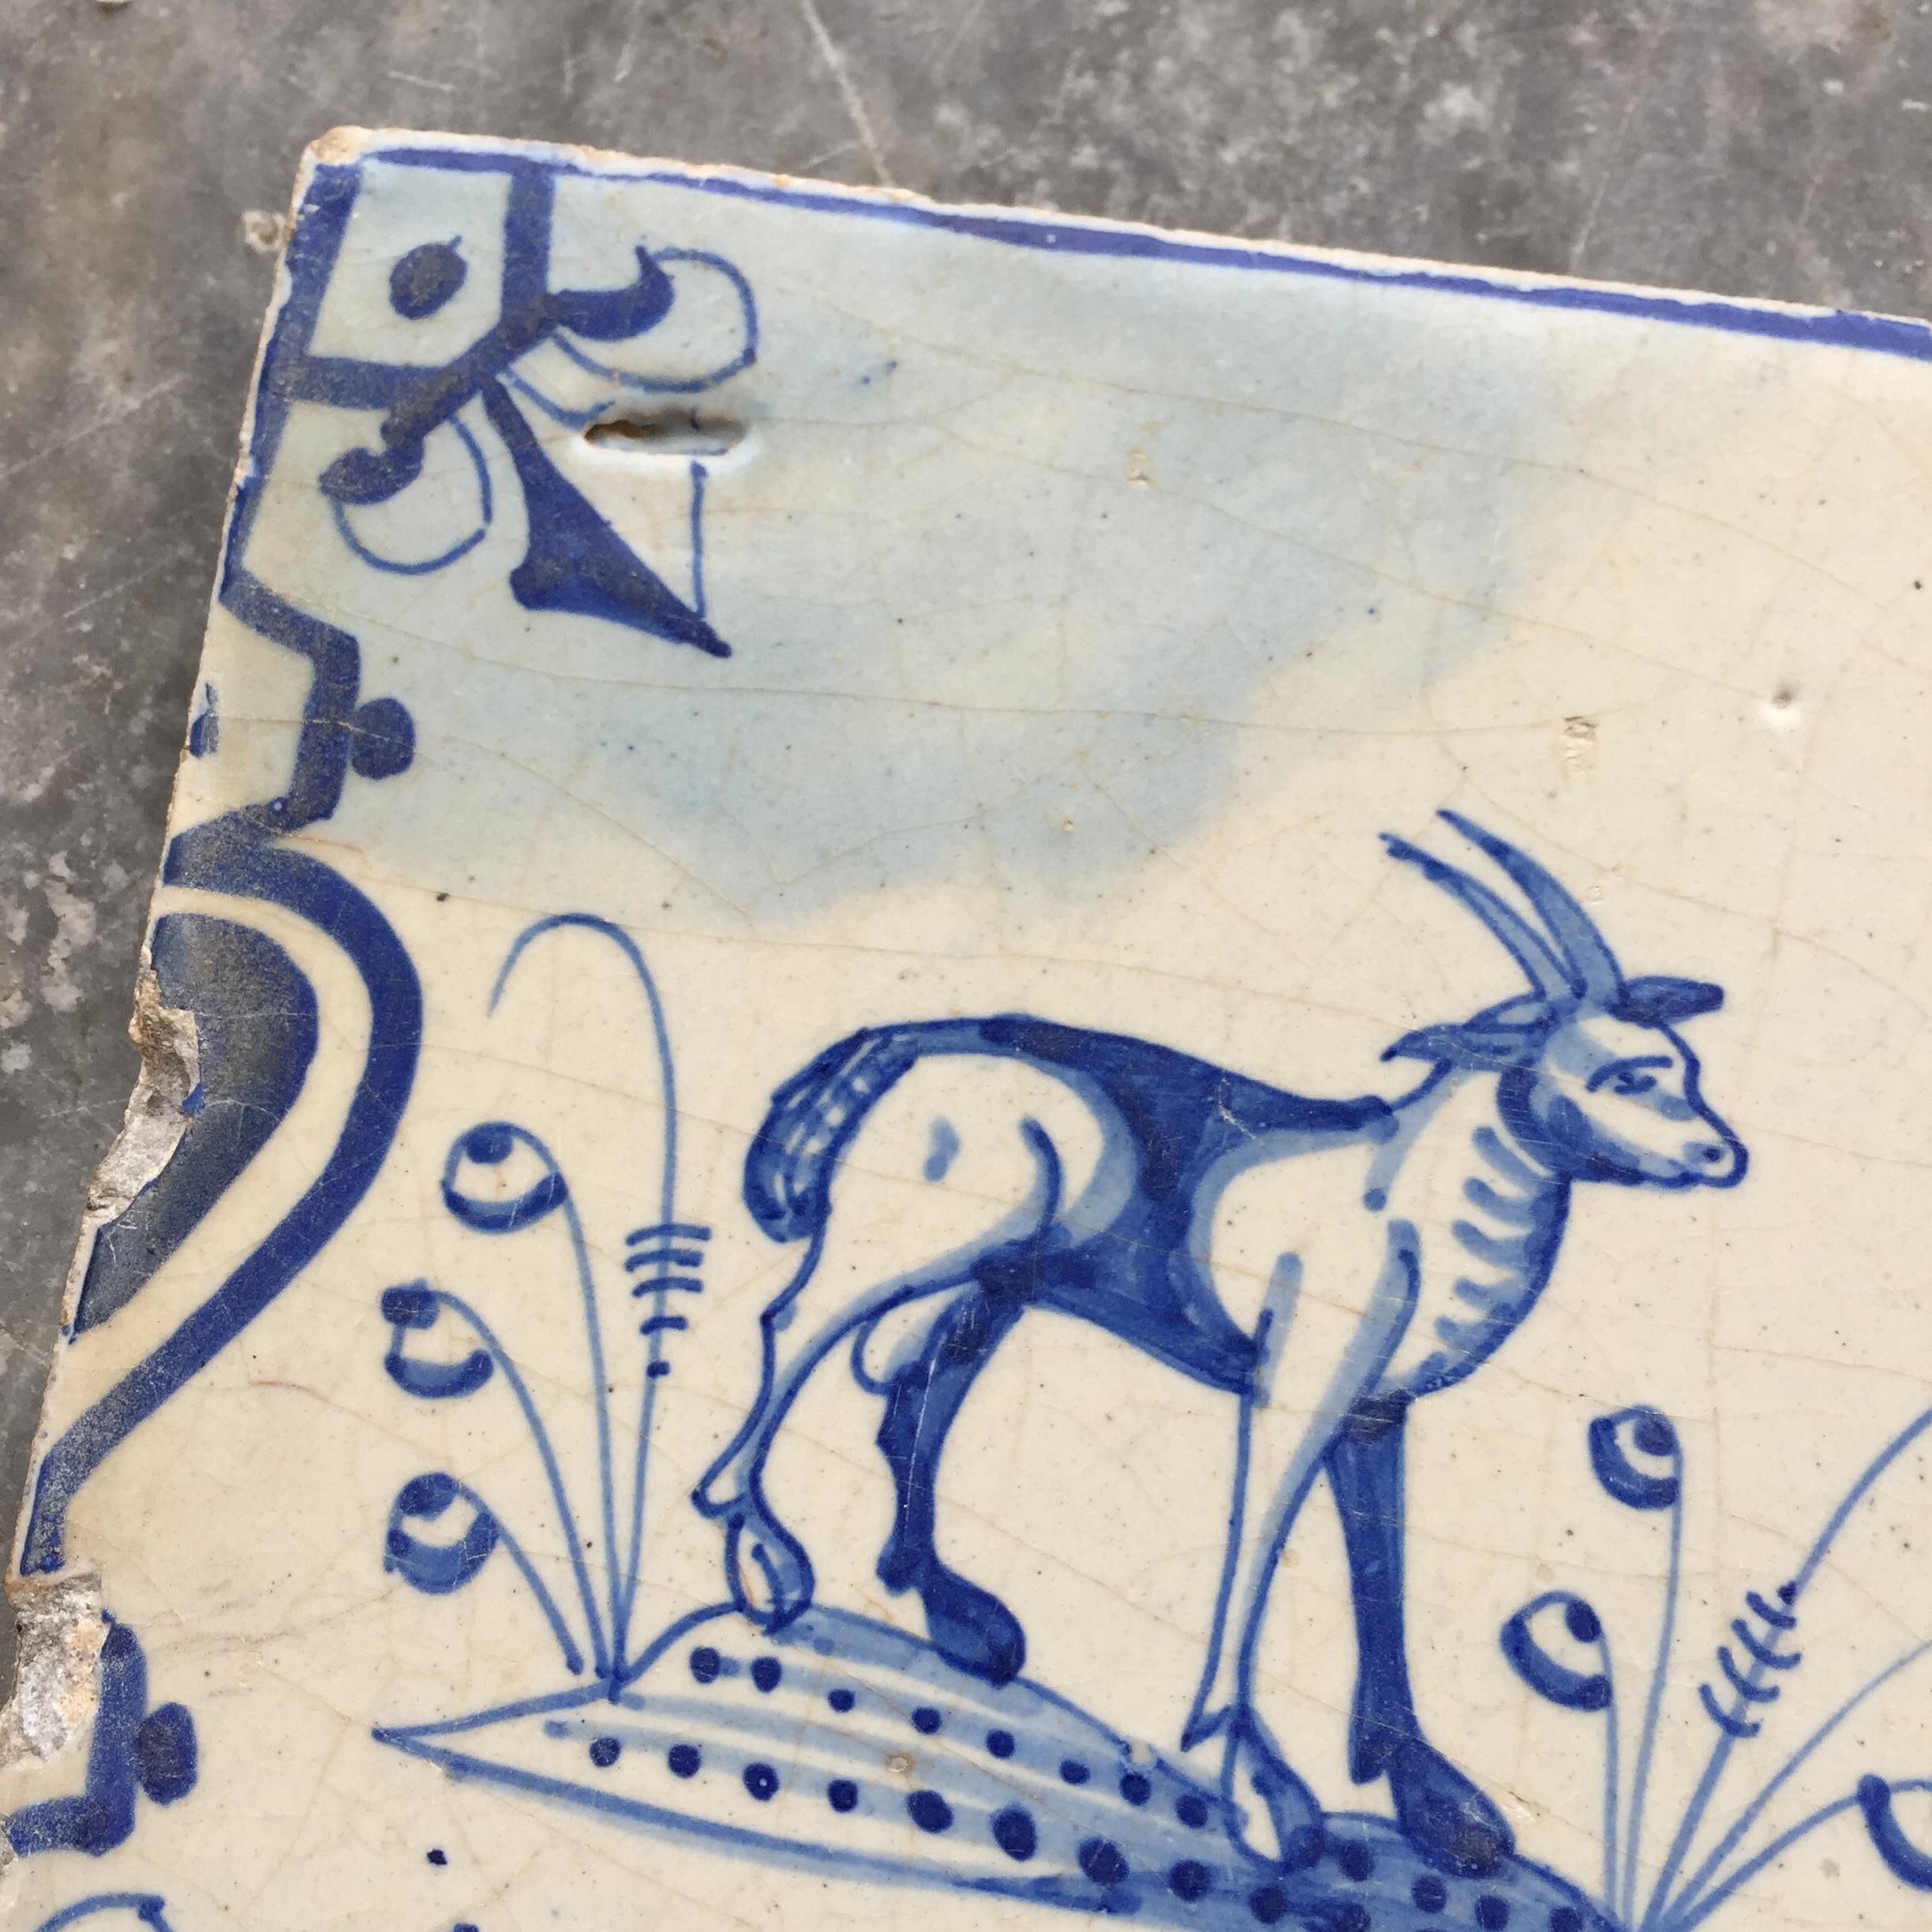 Baroque 17th Century Dutch Delft Tile with decoration of a Goat